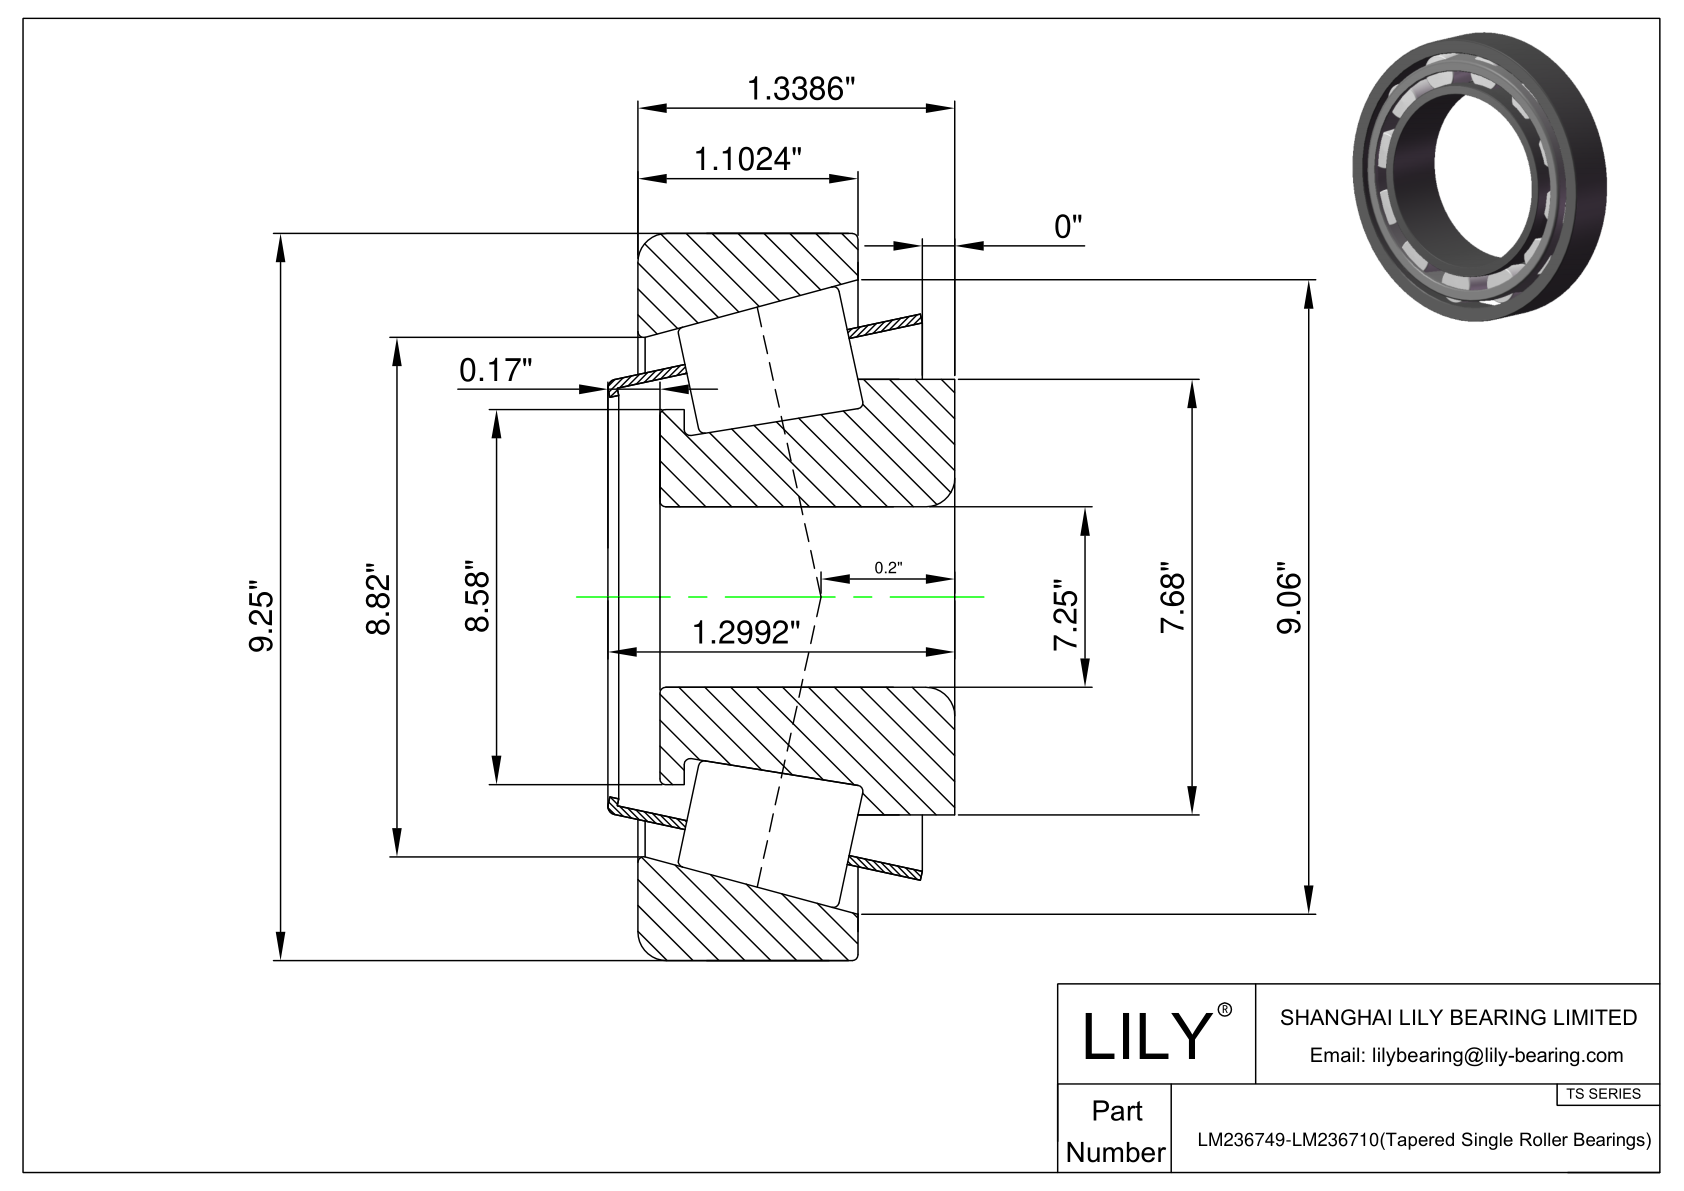 LM236749-LM236710 TS (Tapered Single Roller Bearings) (Imperial) cad drawing